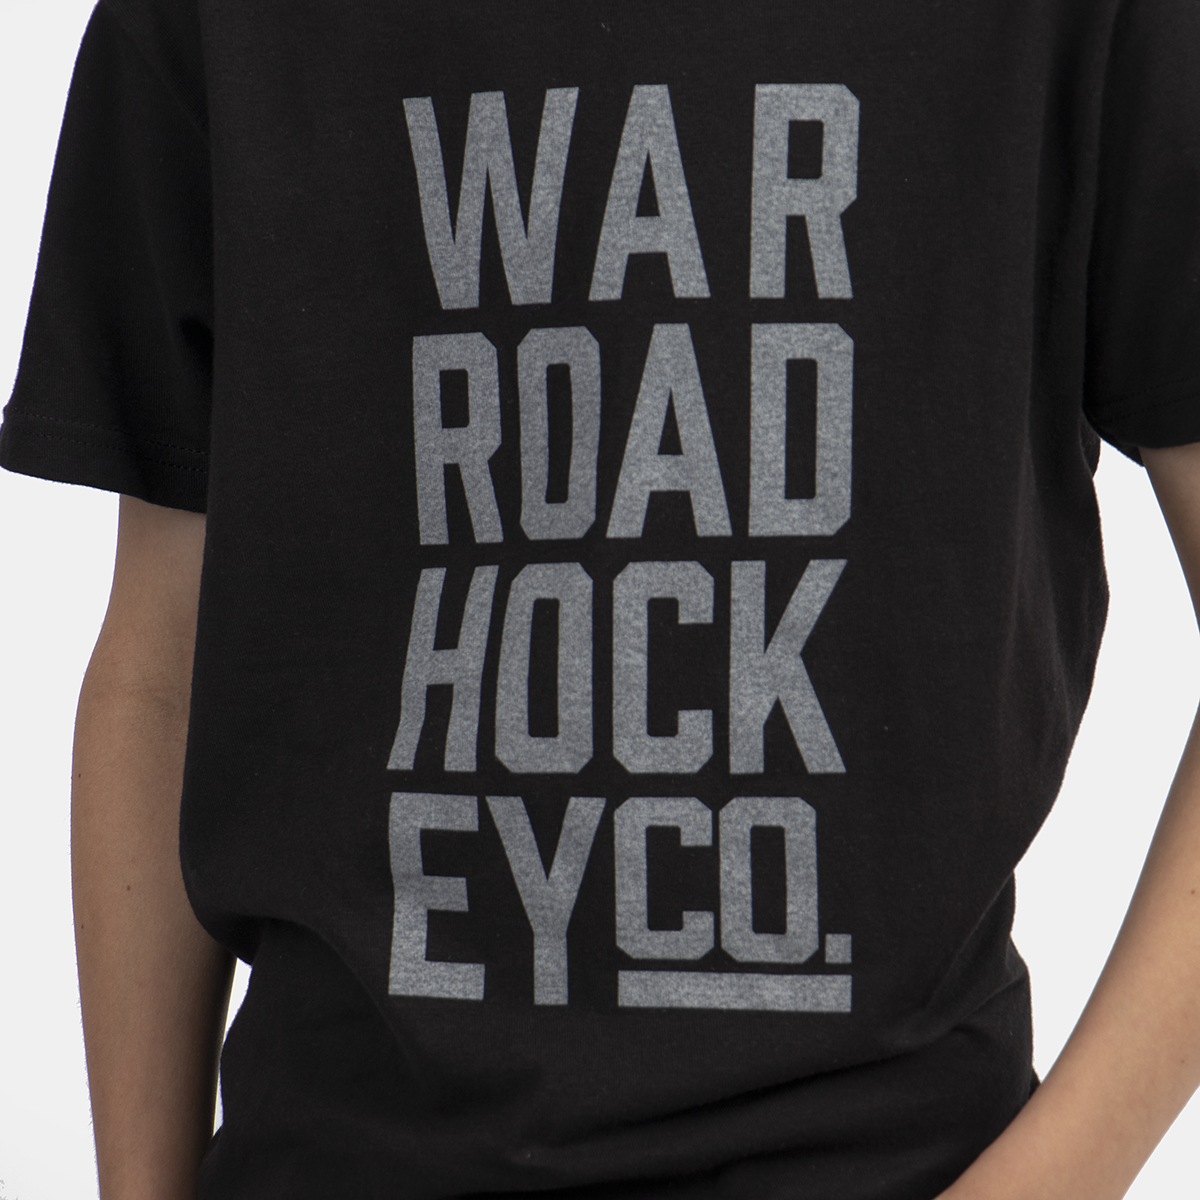 Youth Warroad Stack Tee